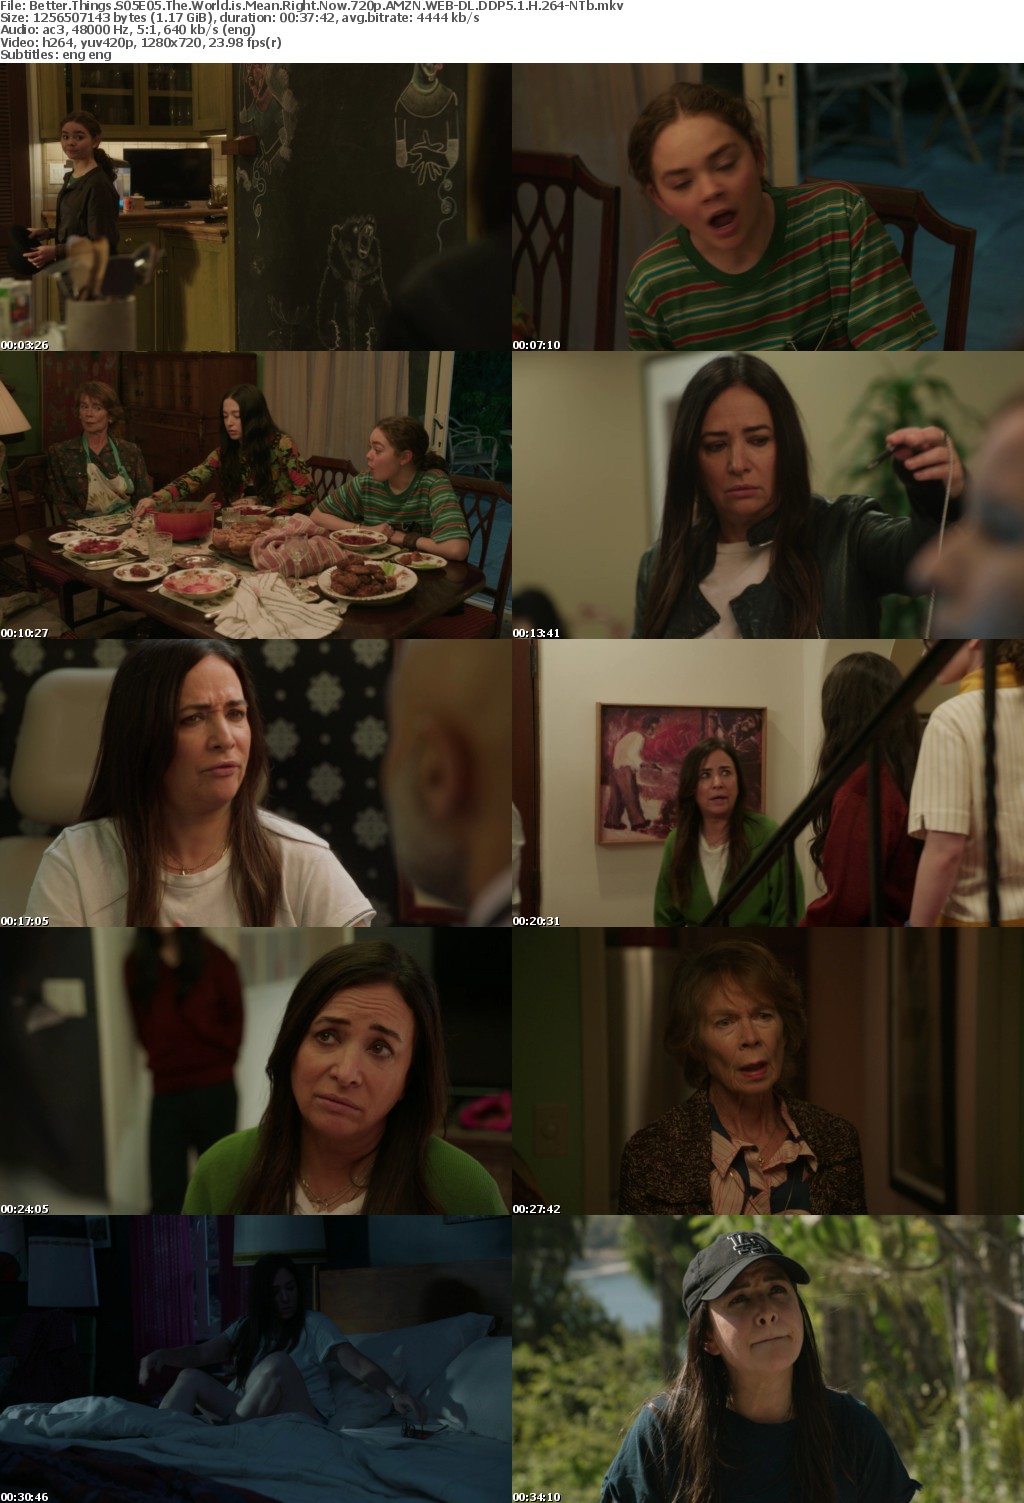 Better Things S05E05 The World is Mean Right Now 720p AMZN WEBRip DDP5 1 x264-NTb